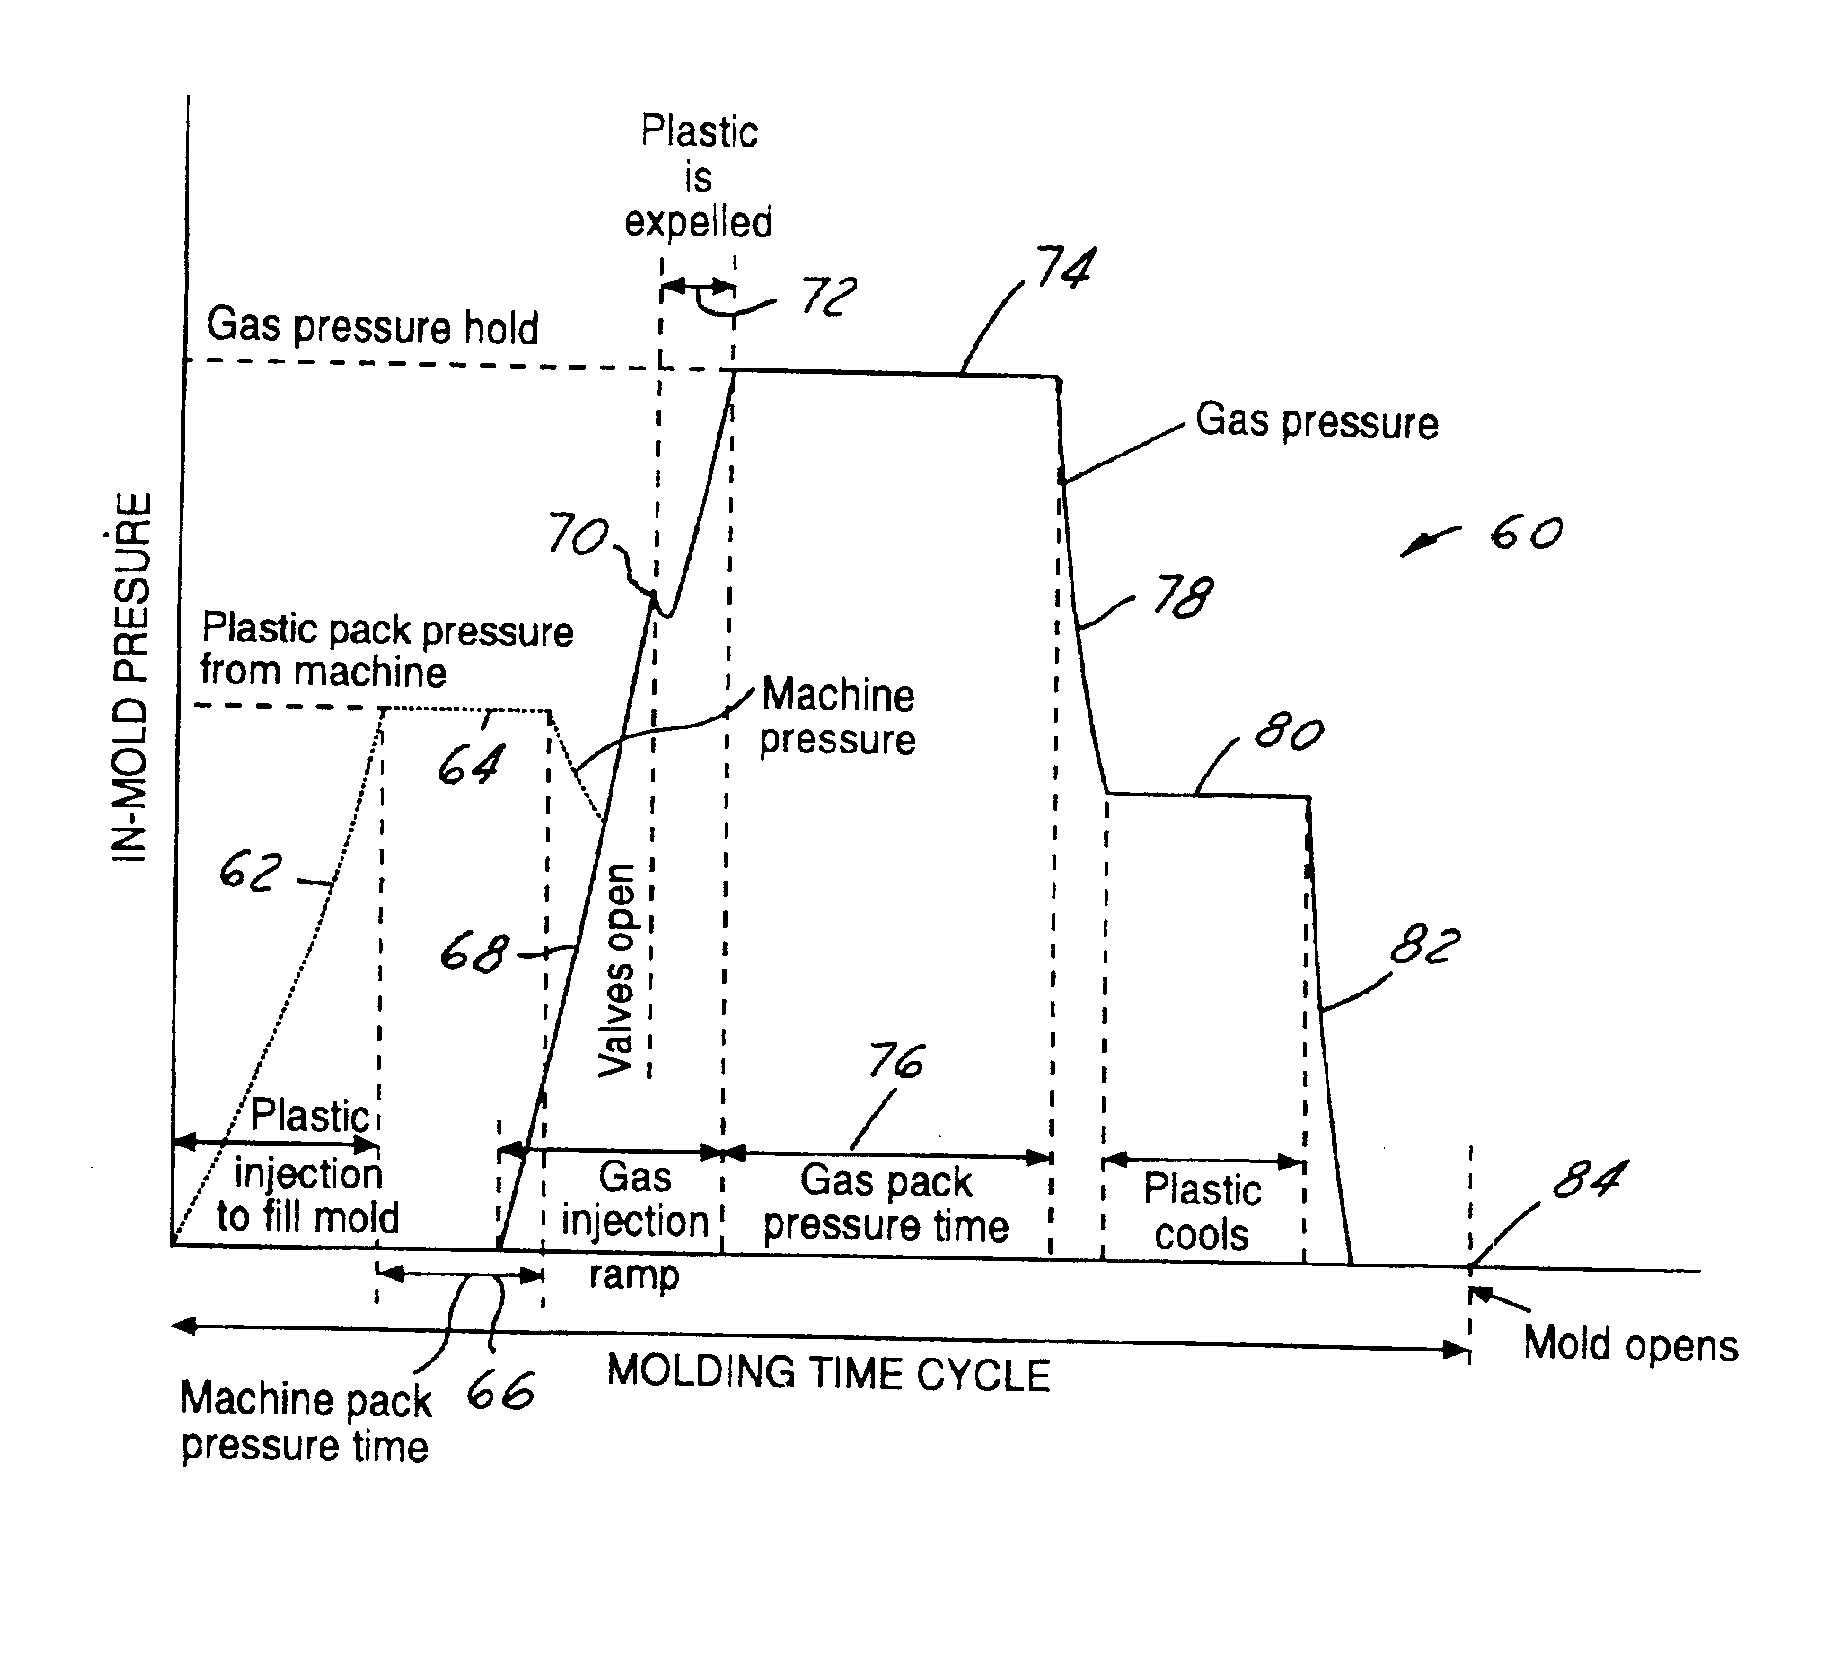 Plastic expulsion process for forming hollow tubular products